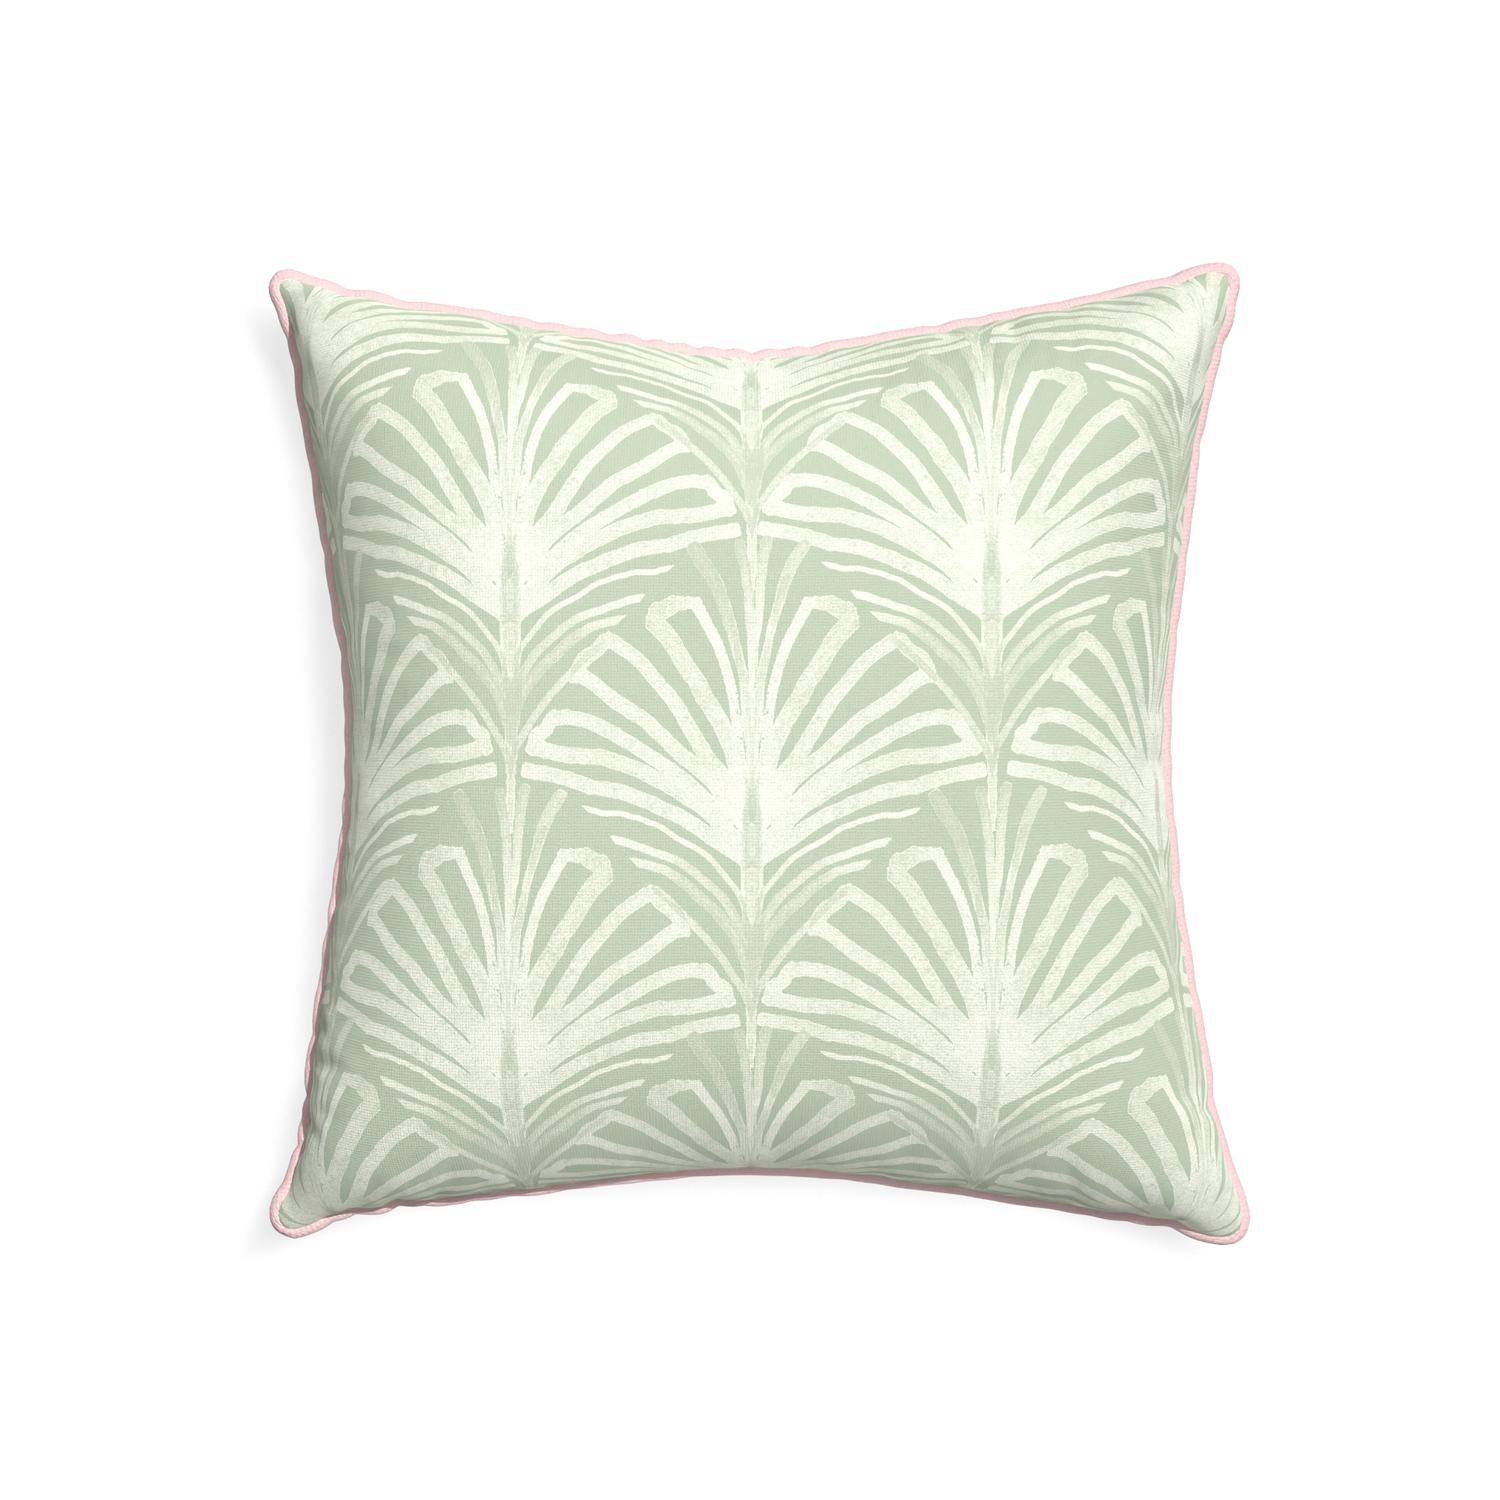 22-square suzy sage custom pillow with petal piping on white background